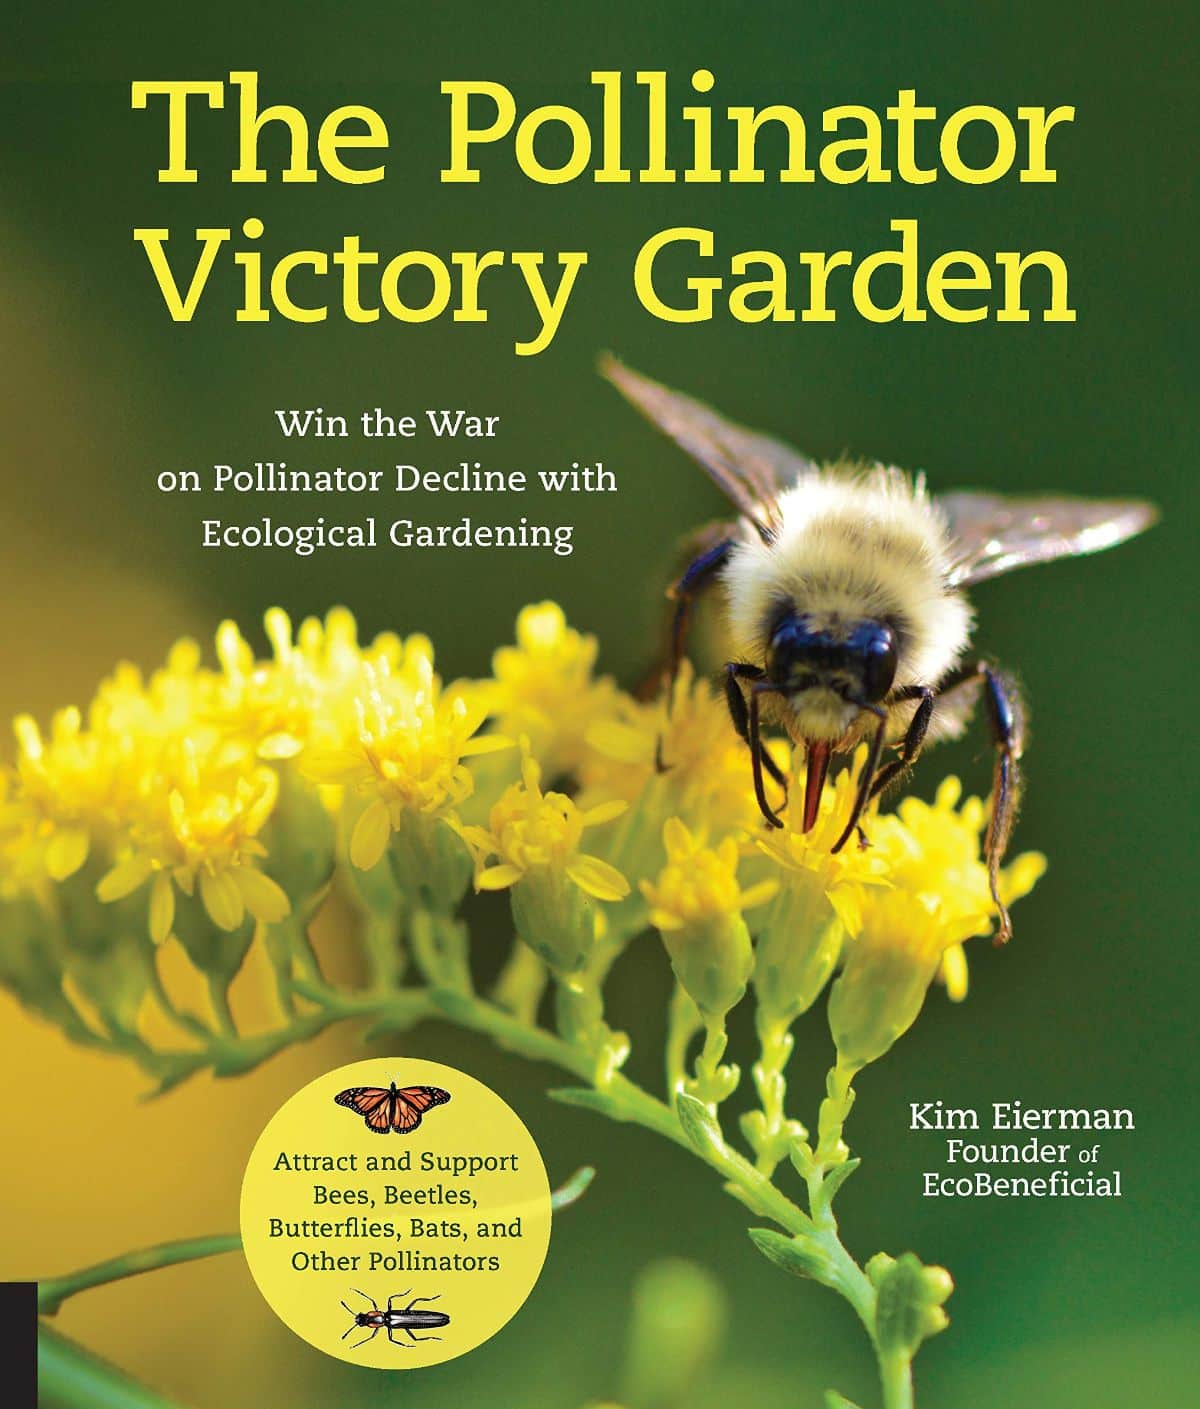 Picture of the book cover for the Pollinator Victory Garden